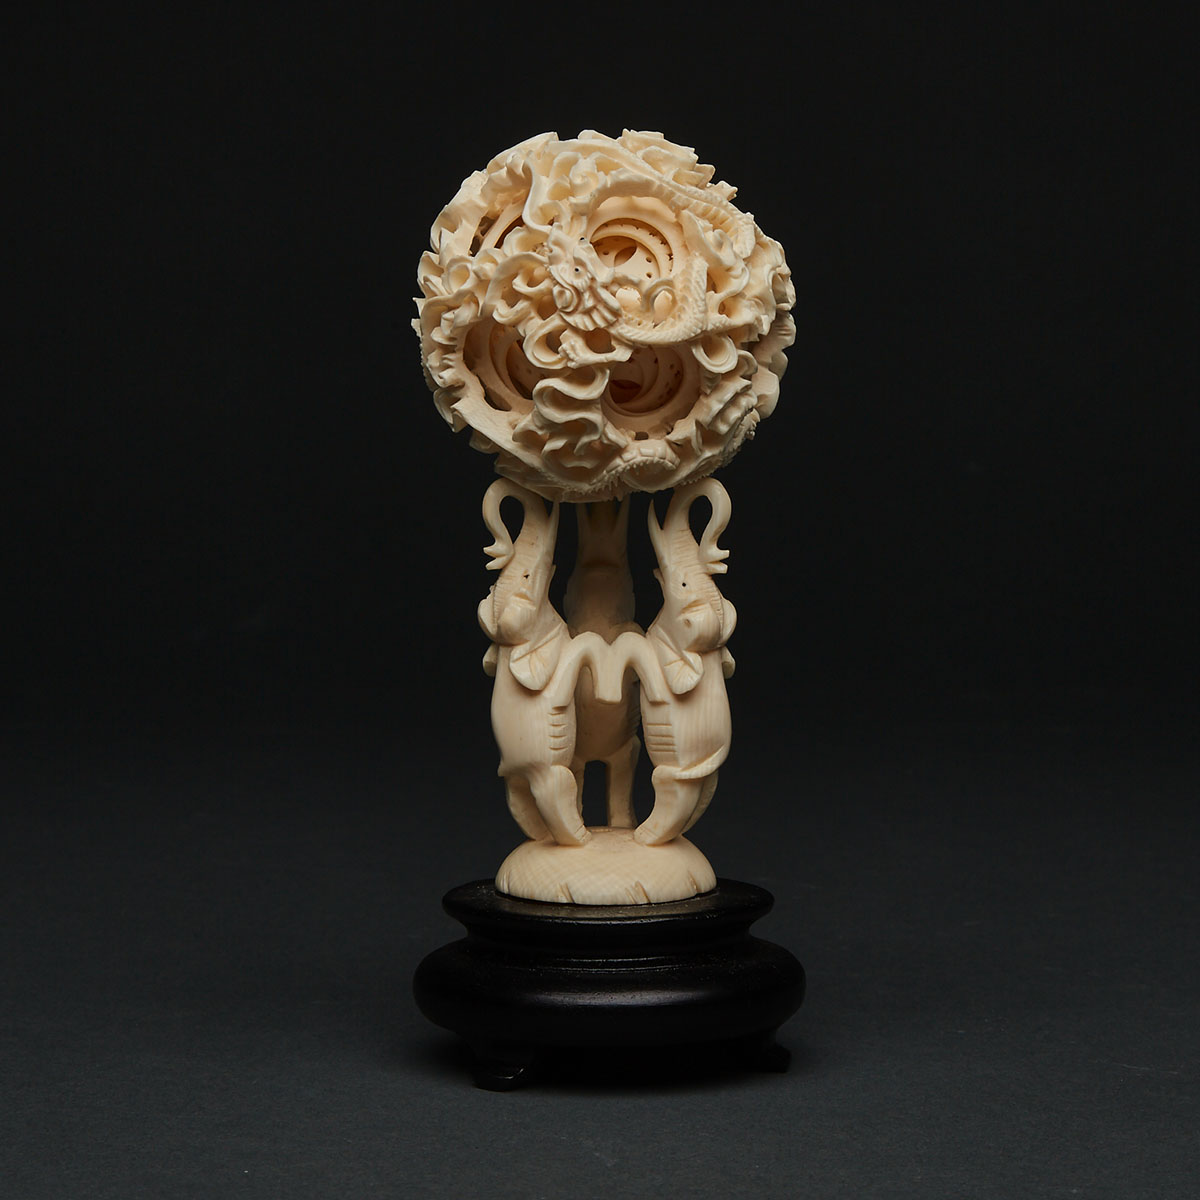 An Ivory Carved Puzzle Ball and Elephant Stand